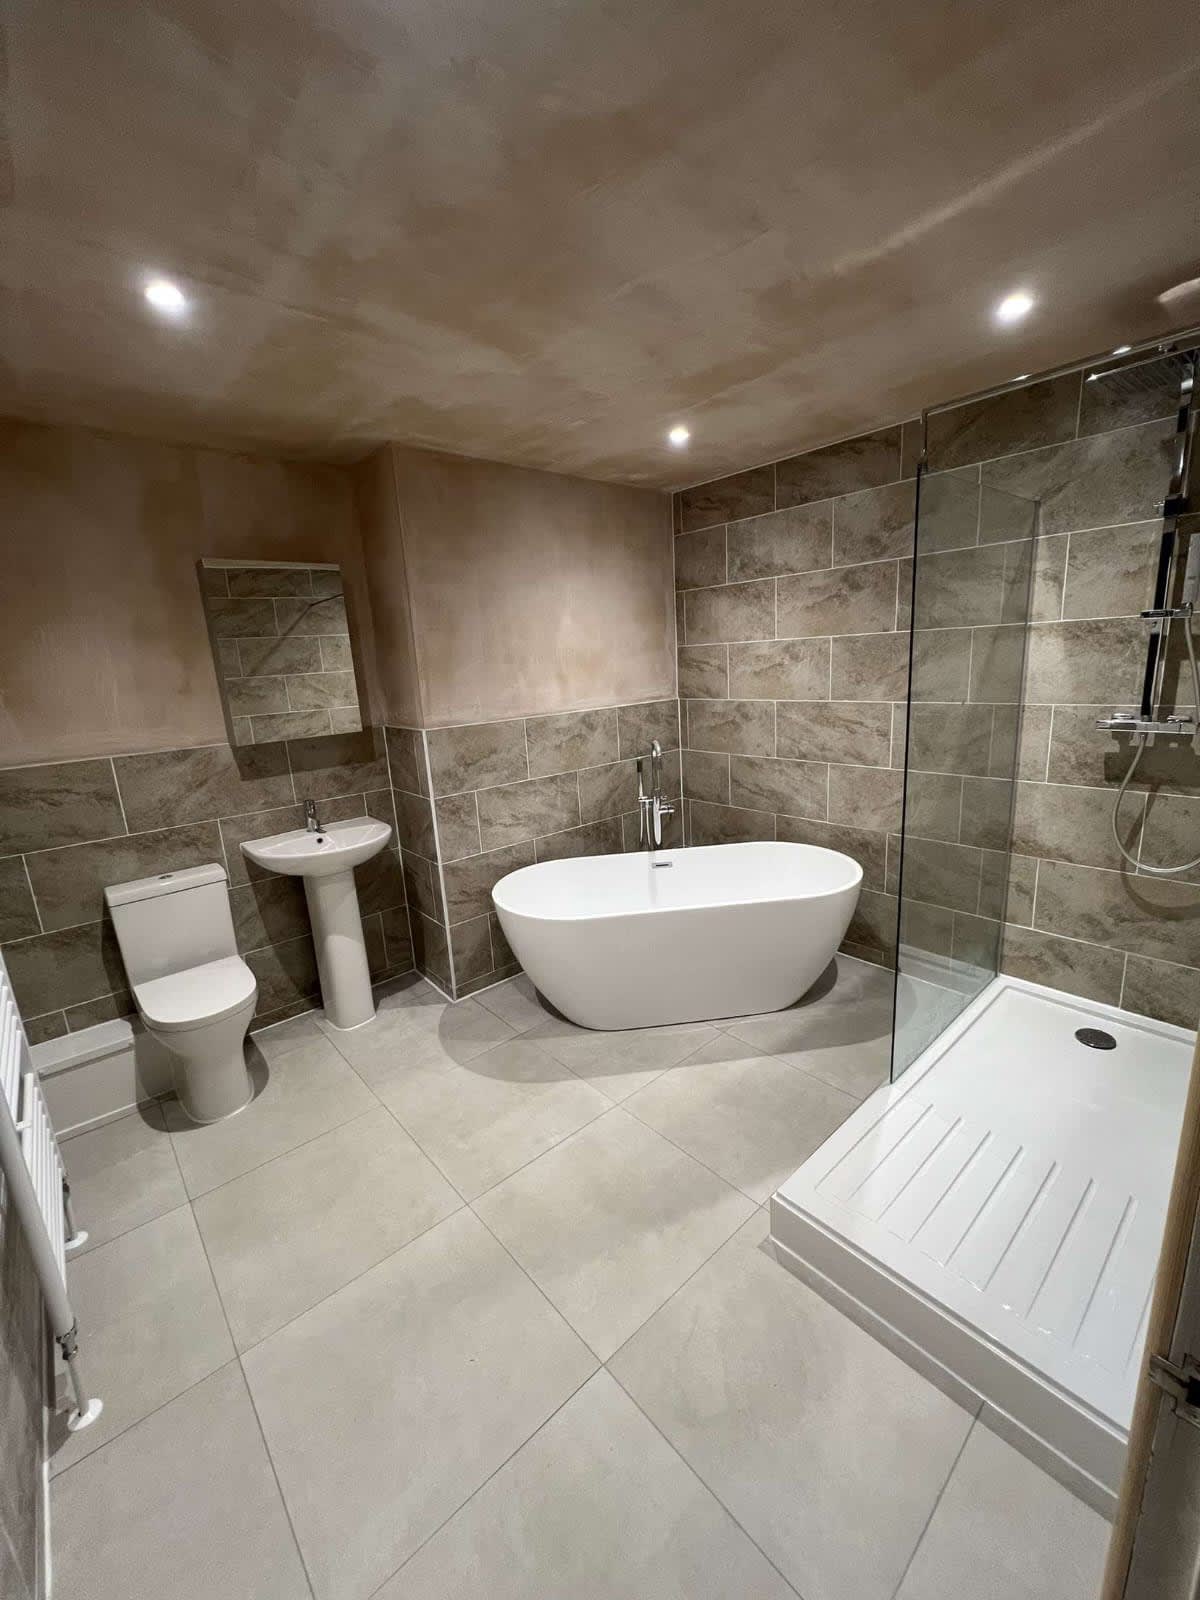 Images Bates Plumbers Yorkshire